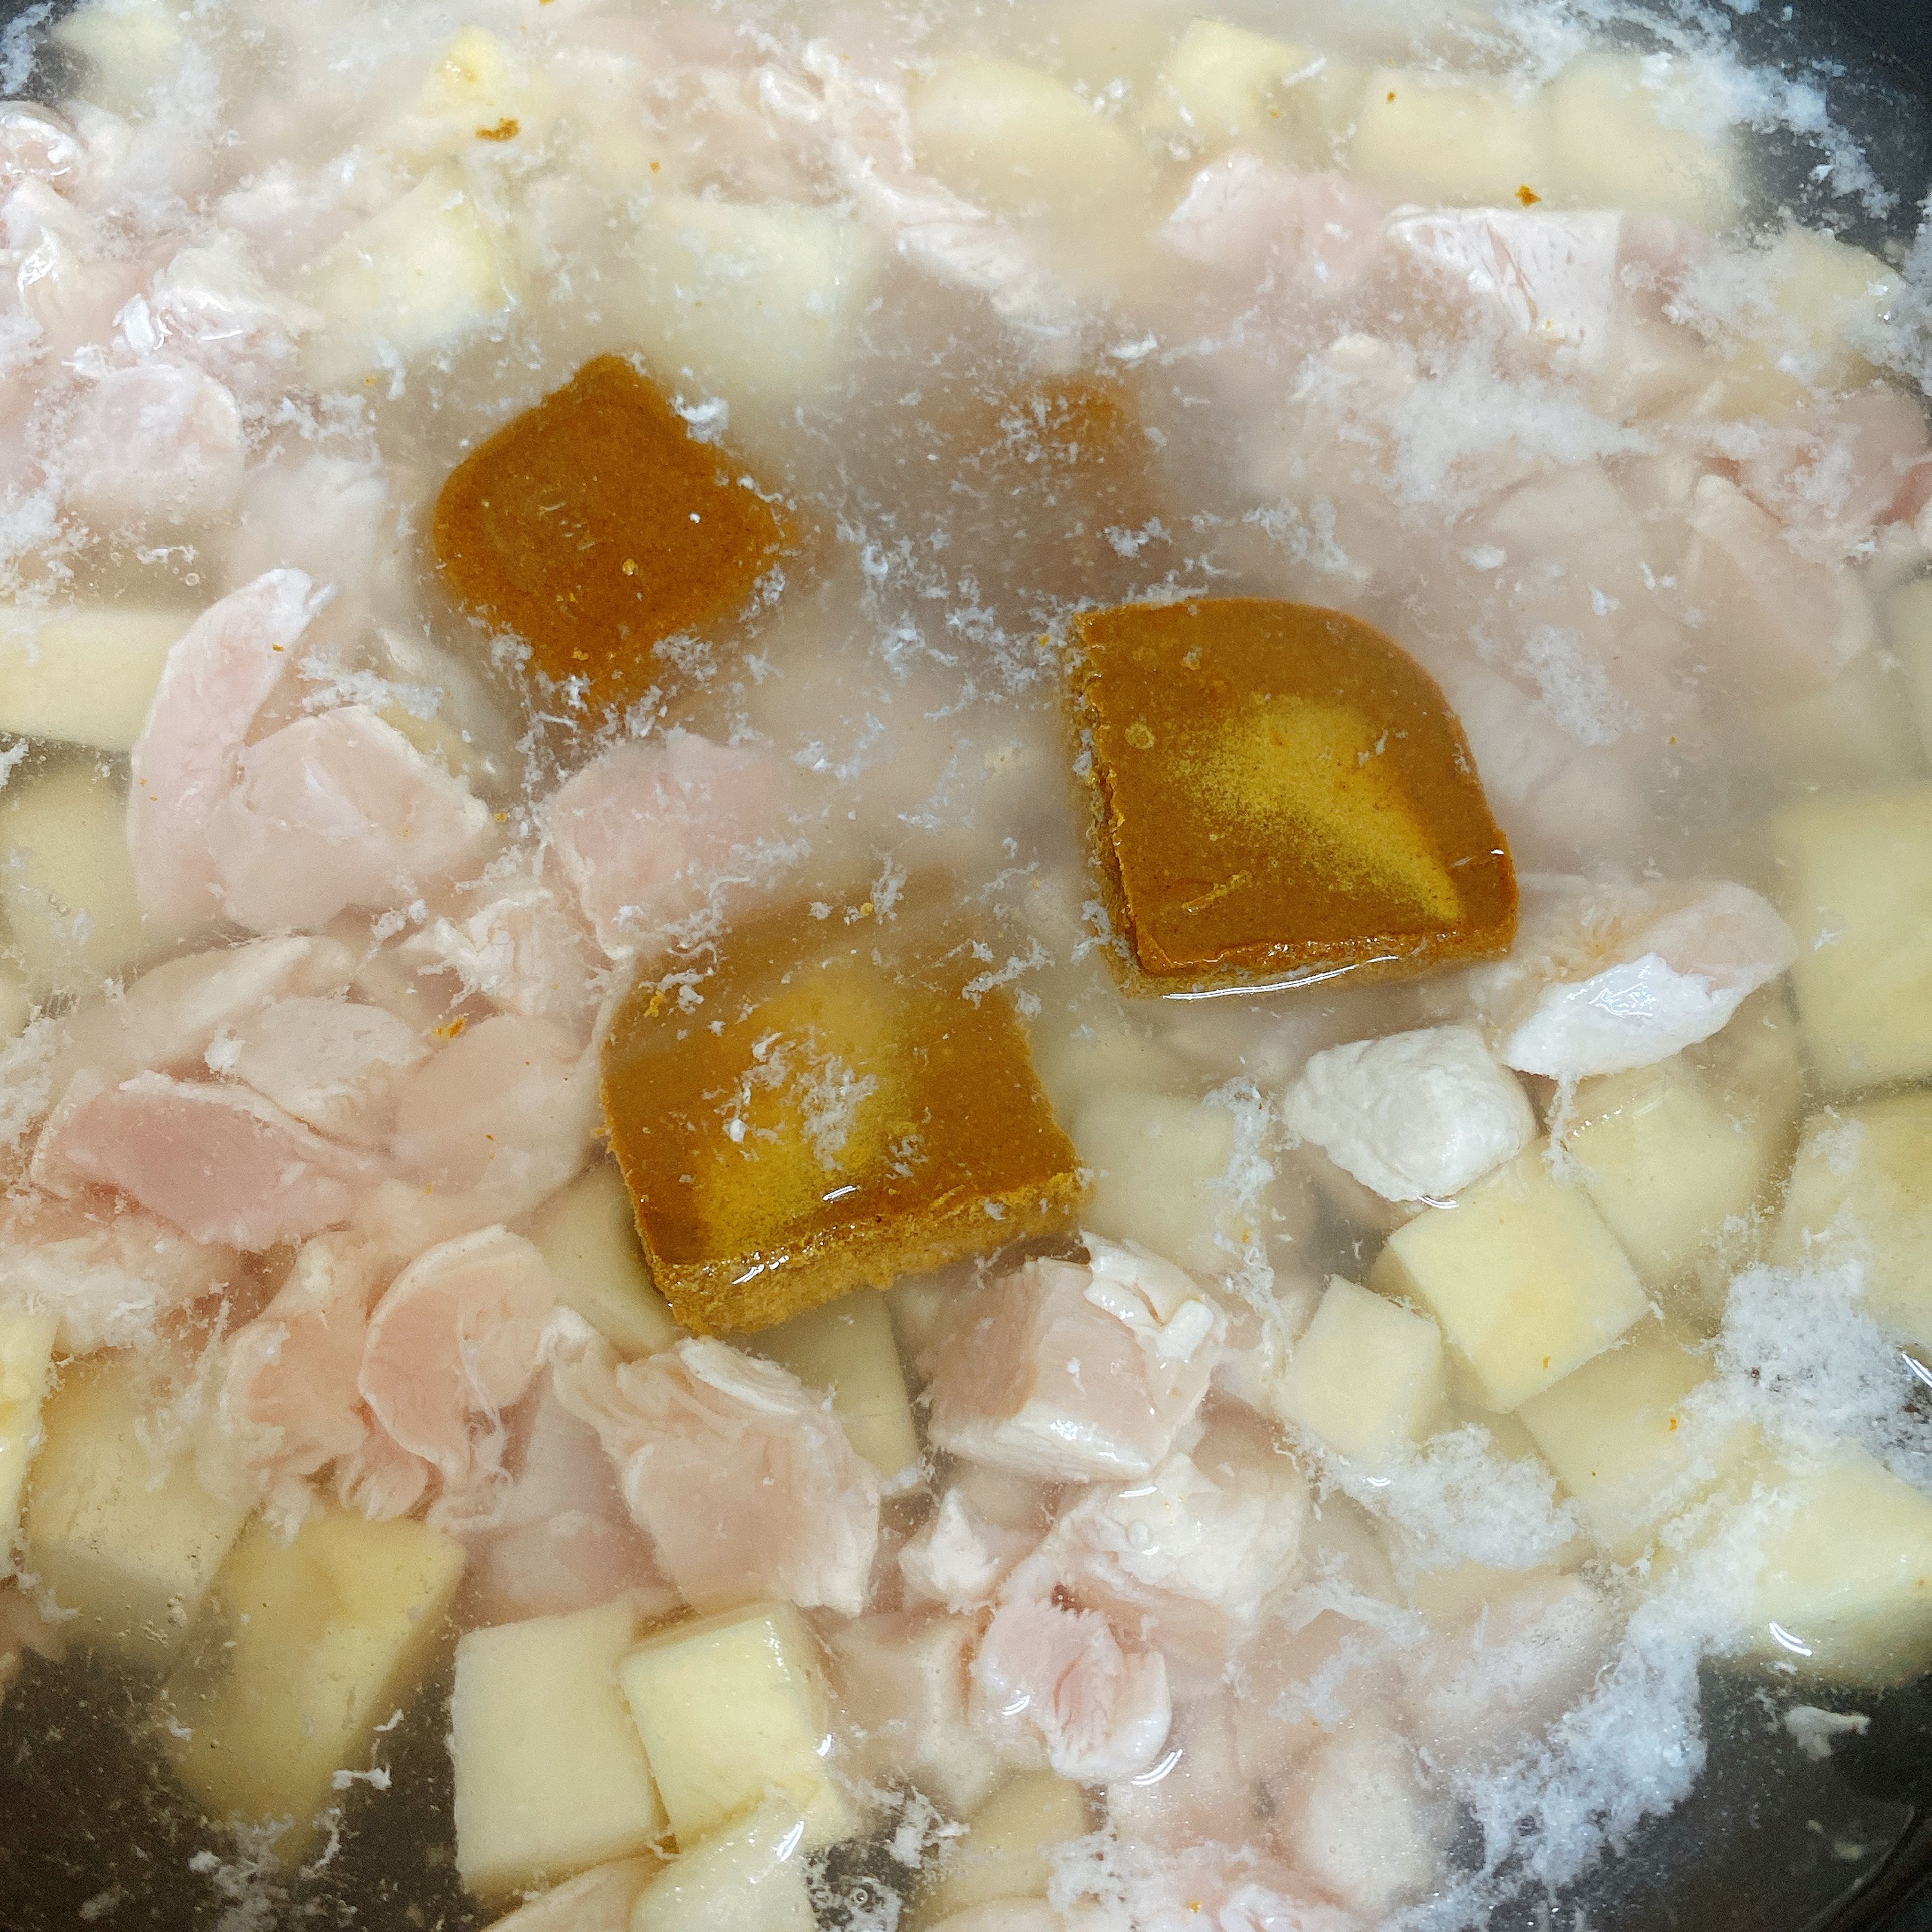 Add cold water to the wok until the ingredients are just fully submerged. Add the curry cubes. Put the lid on and turn the stove to medium when the water starts to boil.